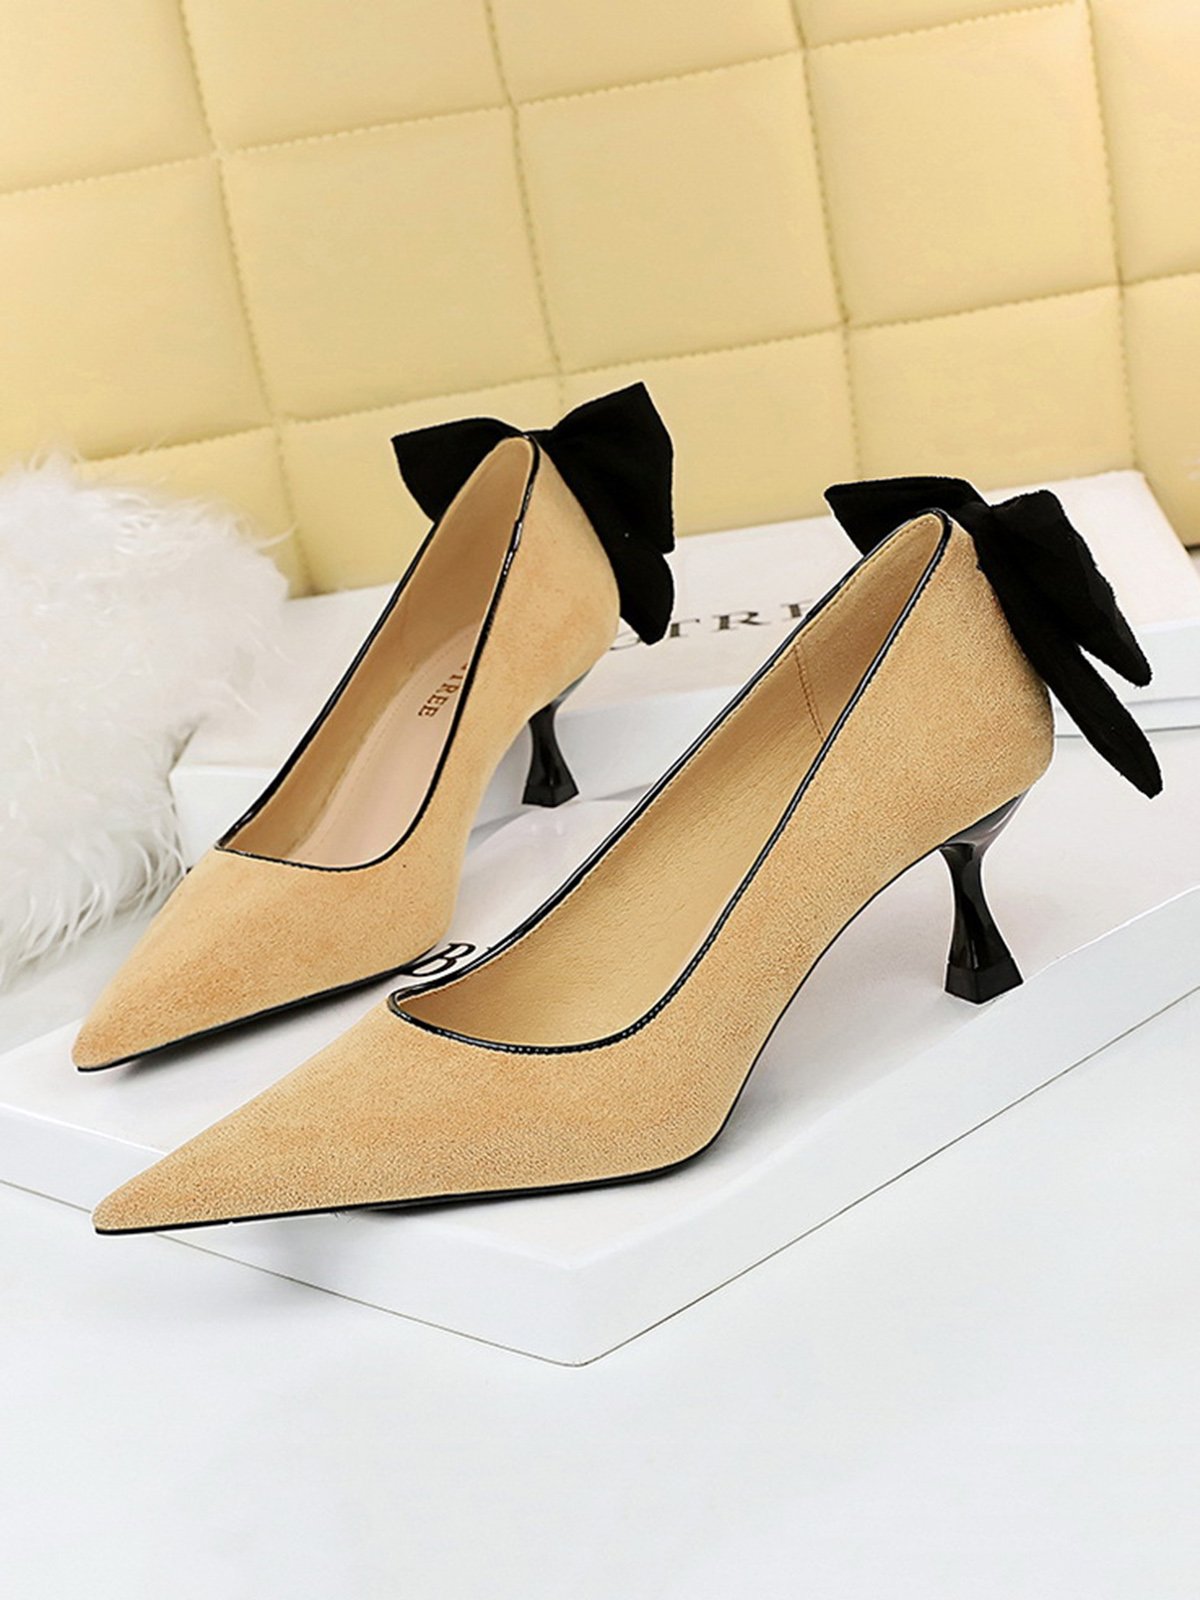 Christmas Bowknot Party Stiletto Heel Pumps